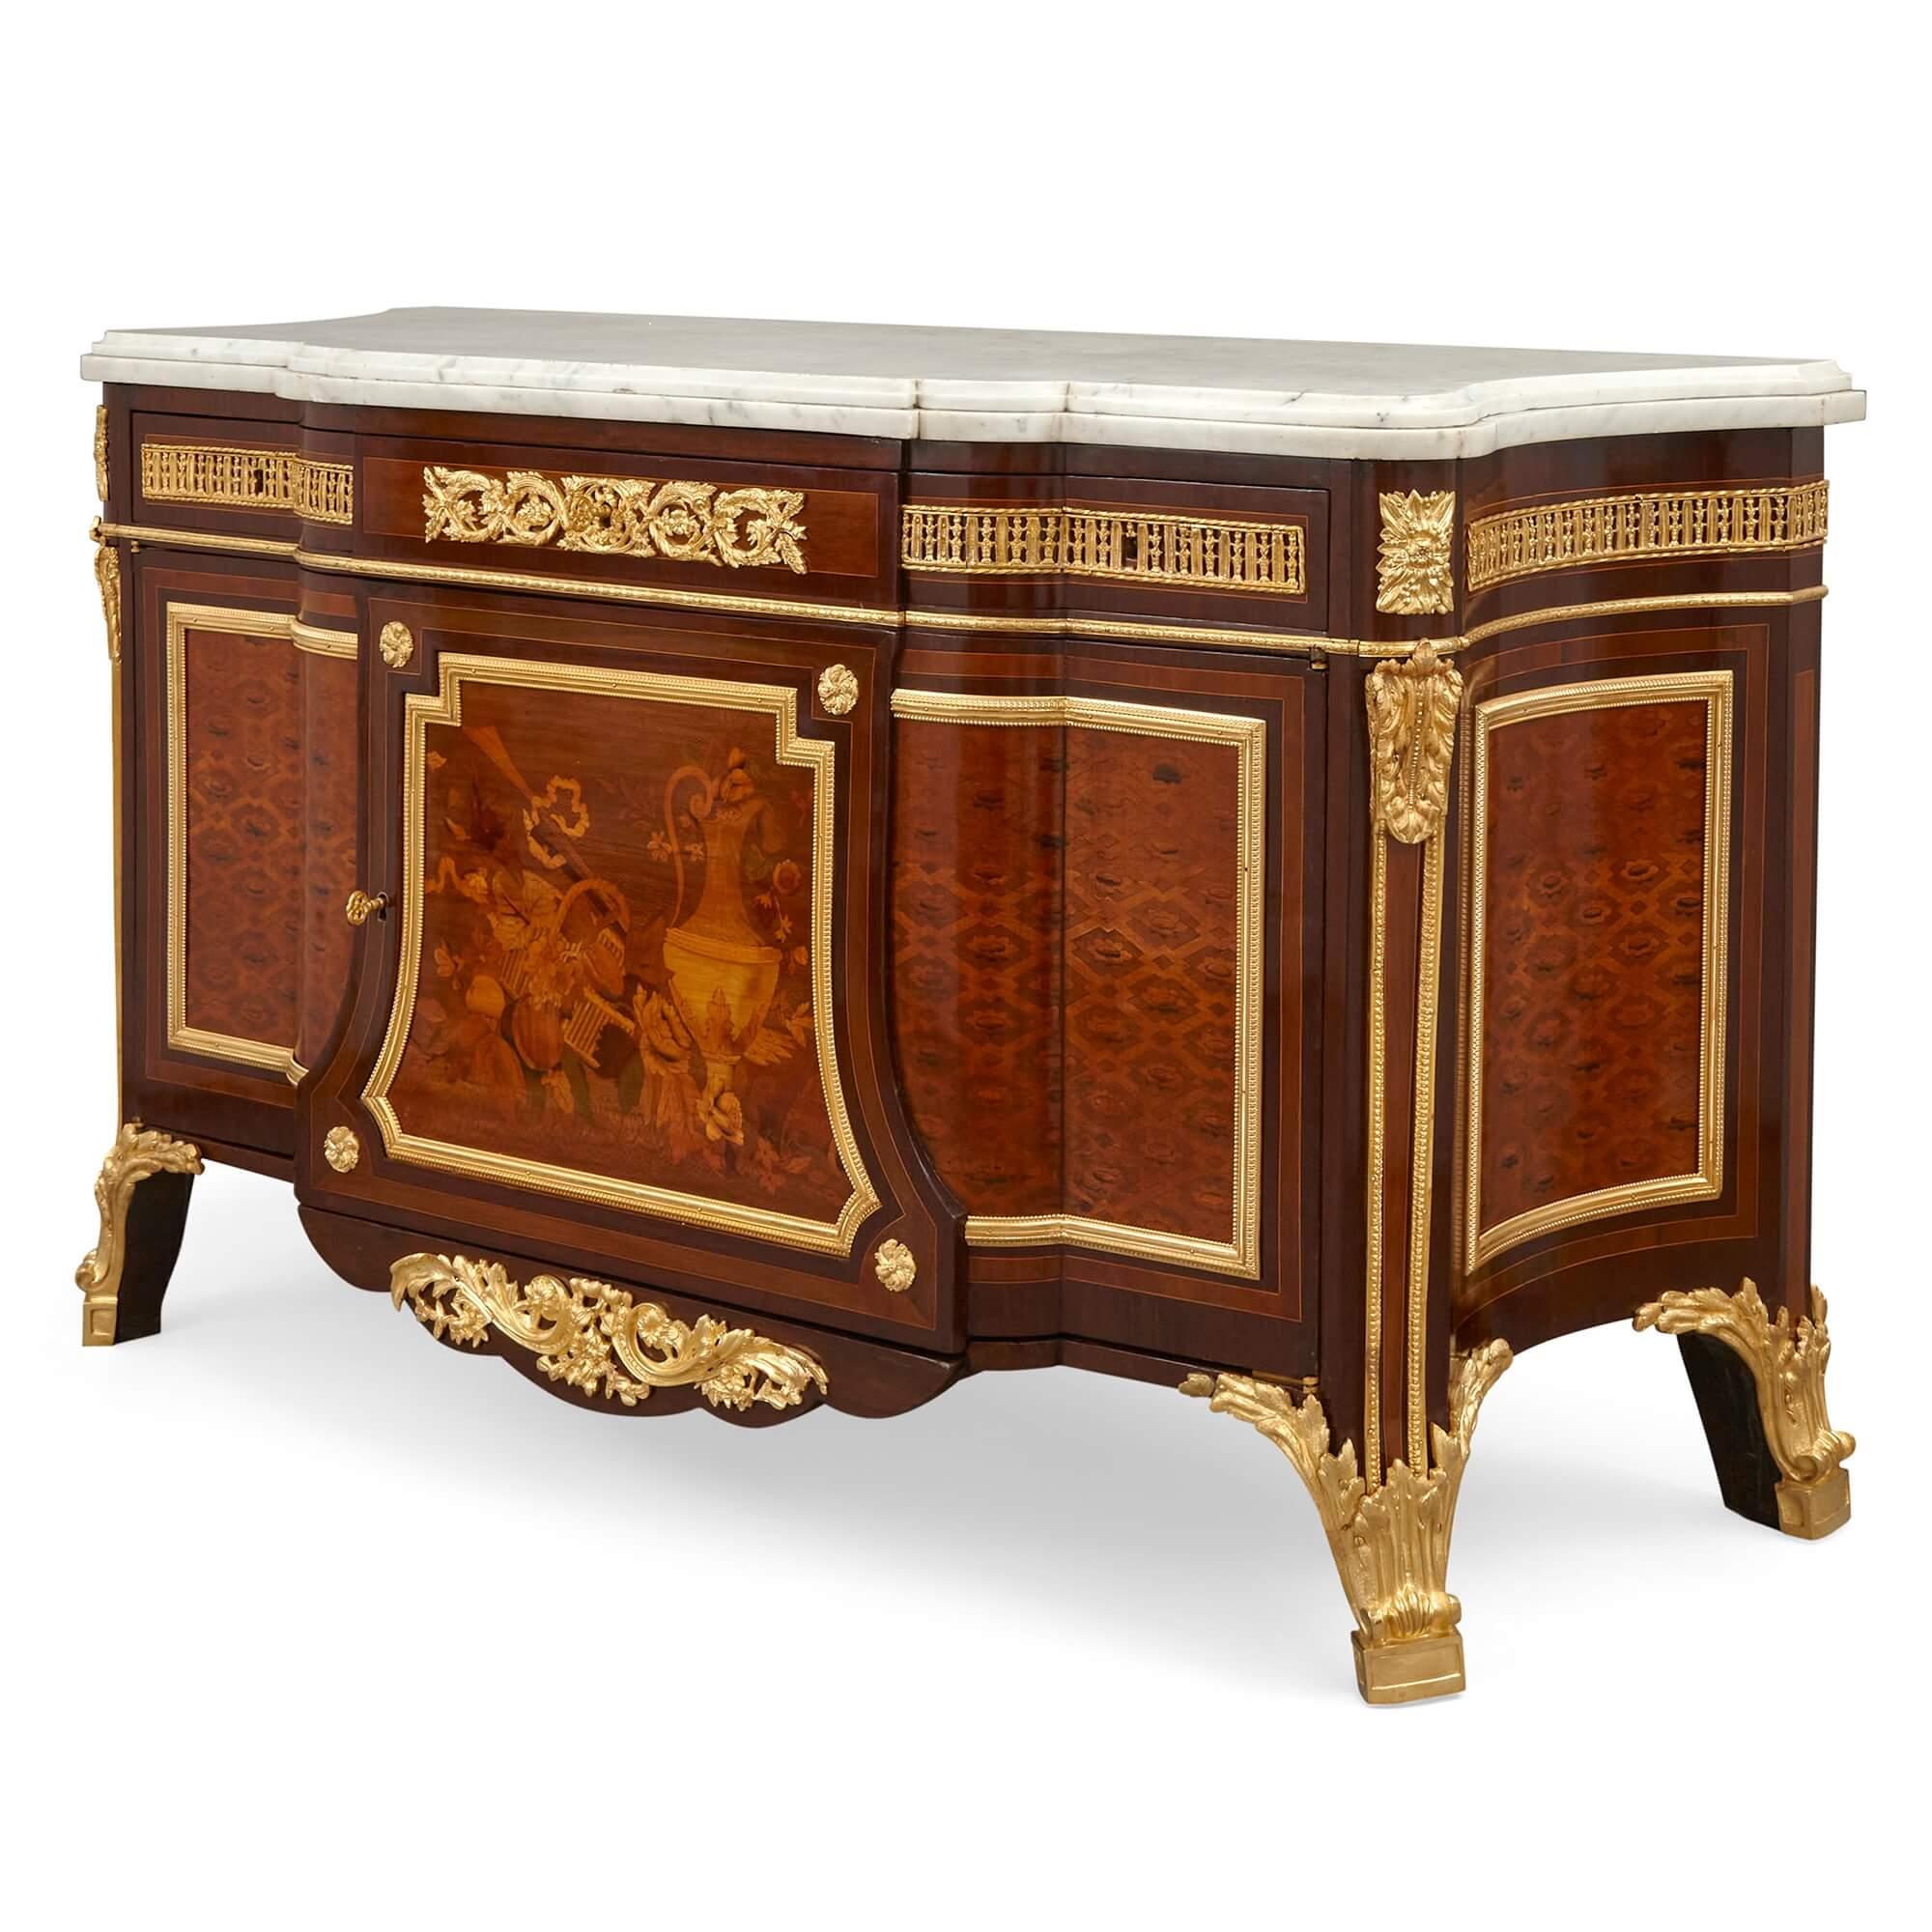 Very fine Louis XVI style ormolu-mounted marquetry commode
French, Early 20th Century
Height 95cm, width 162cm, depth 59cm

After an important model by Jean-Henri Riesener (French, 1734-1806), a highly renowned ebeniste of great standing, this